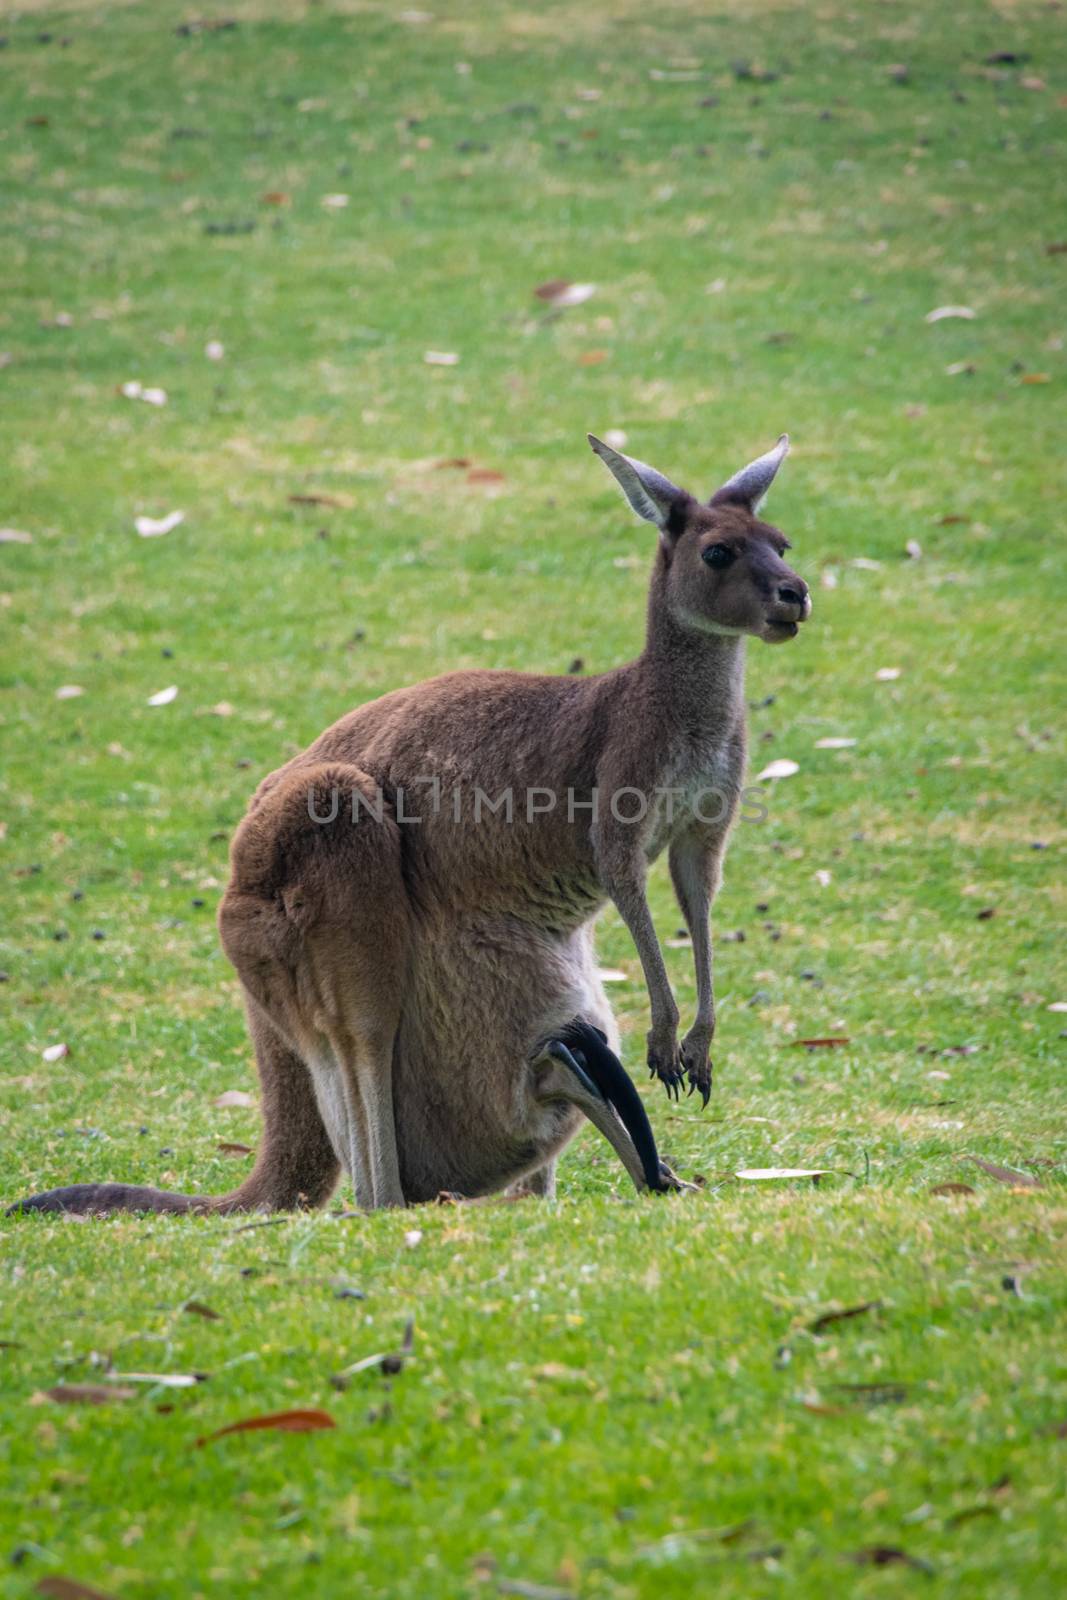 Kangaroo with joey in mothers pouch in Australia by MXW_Stock